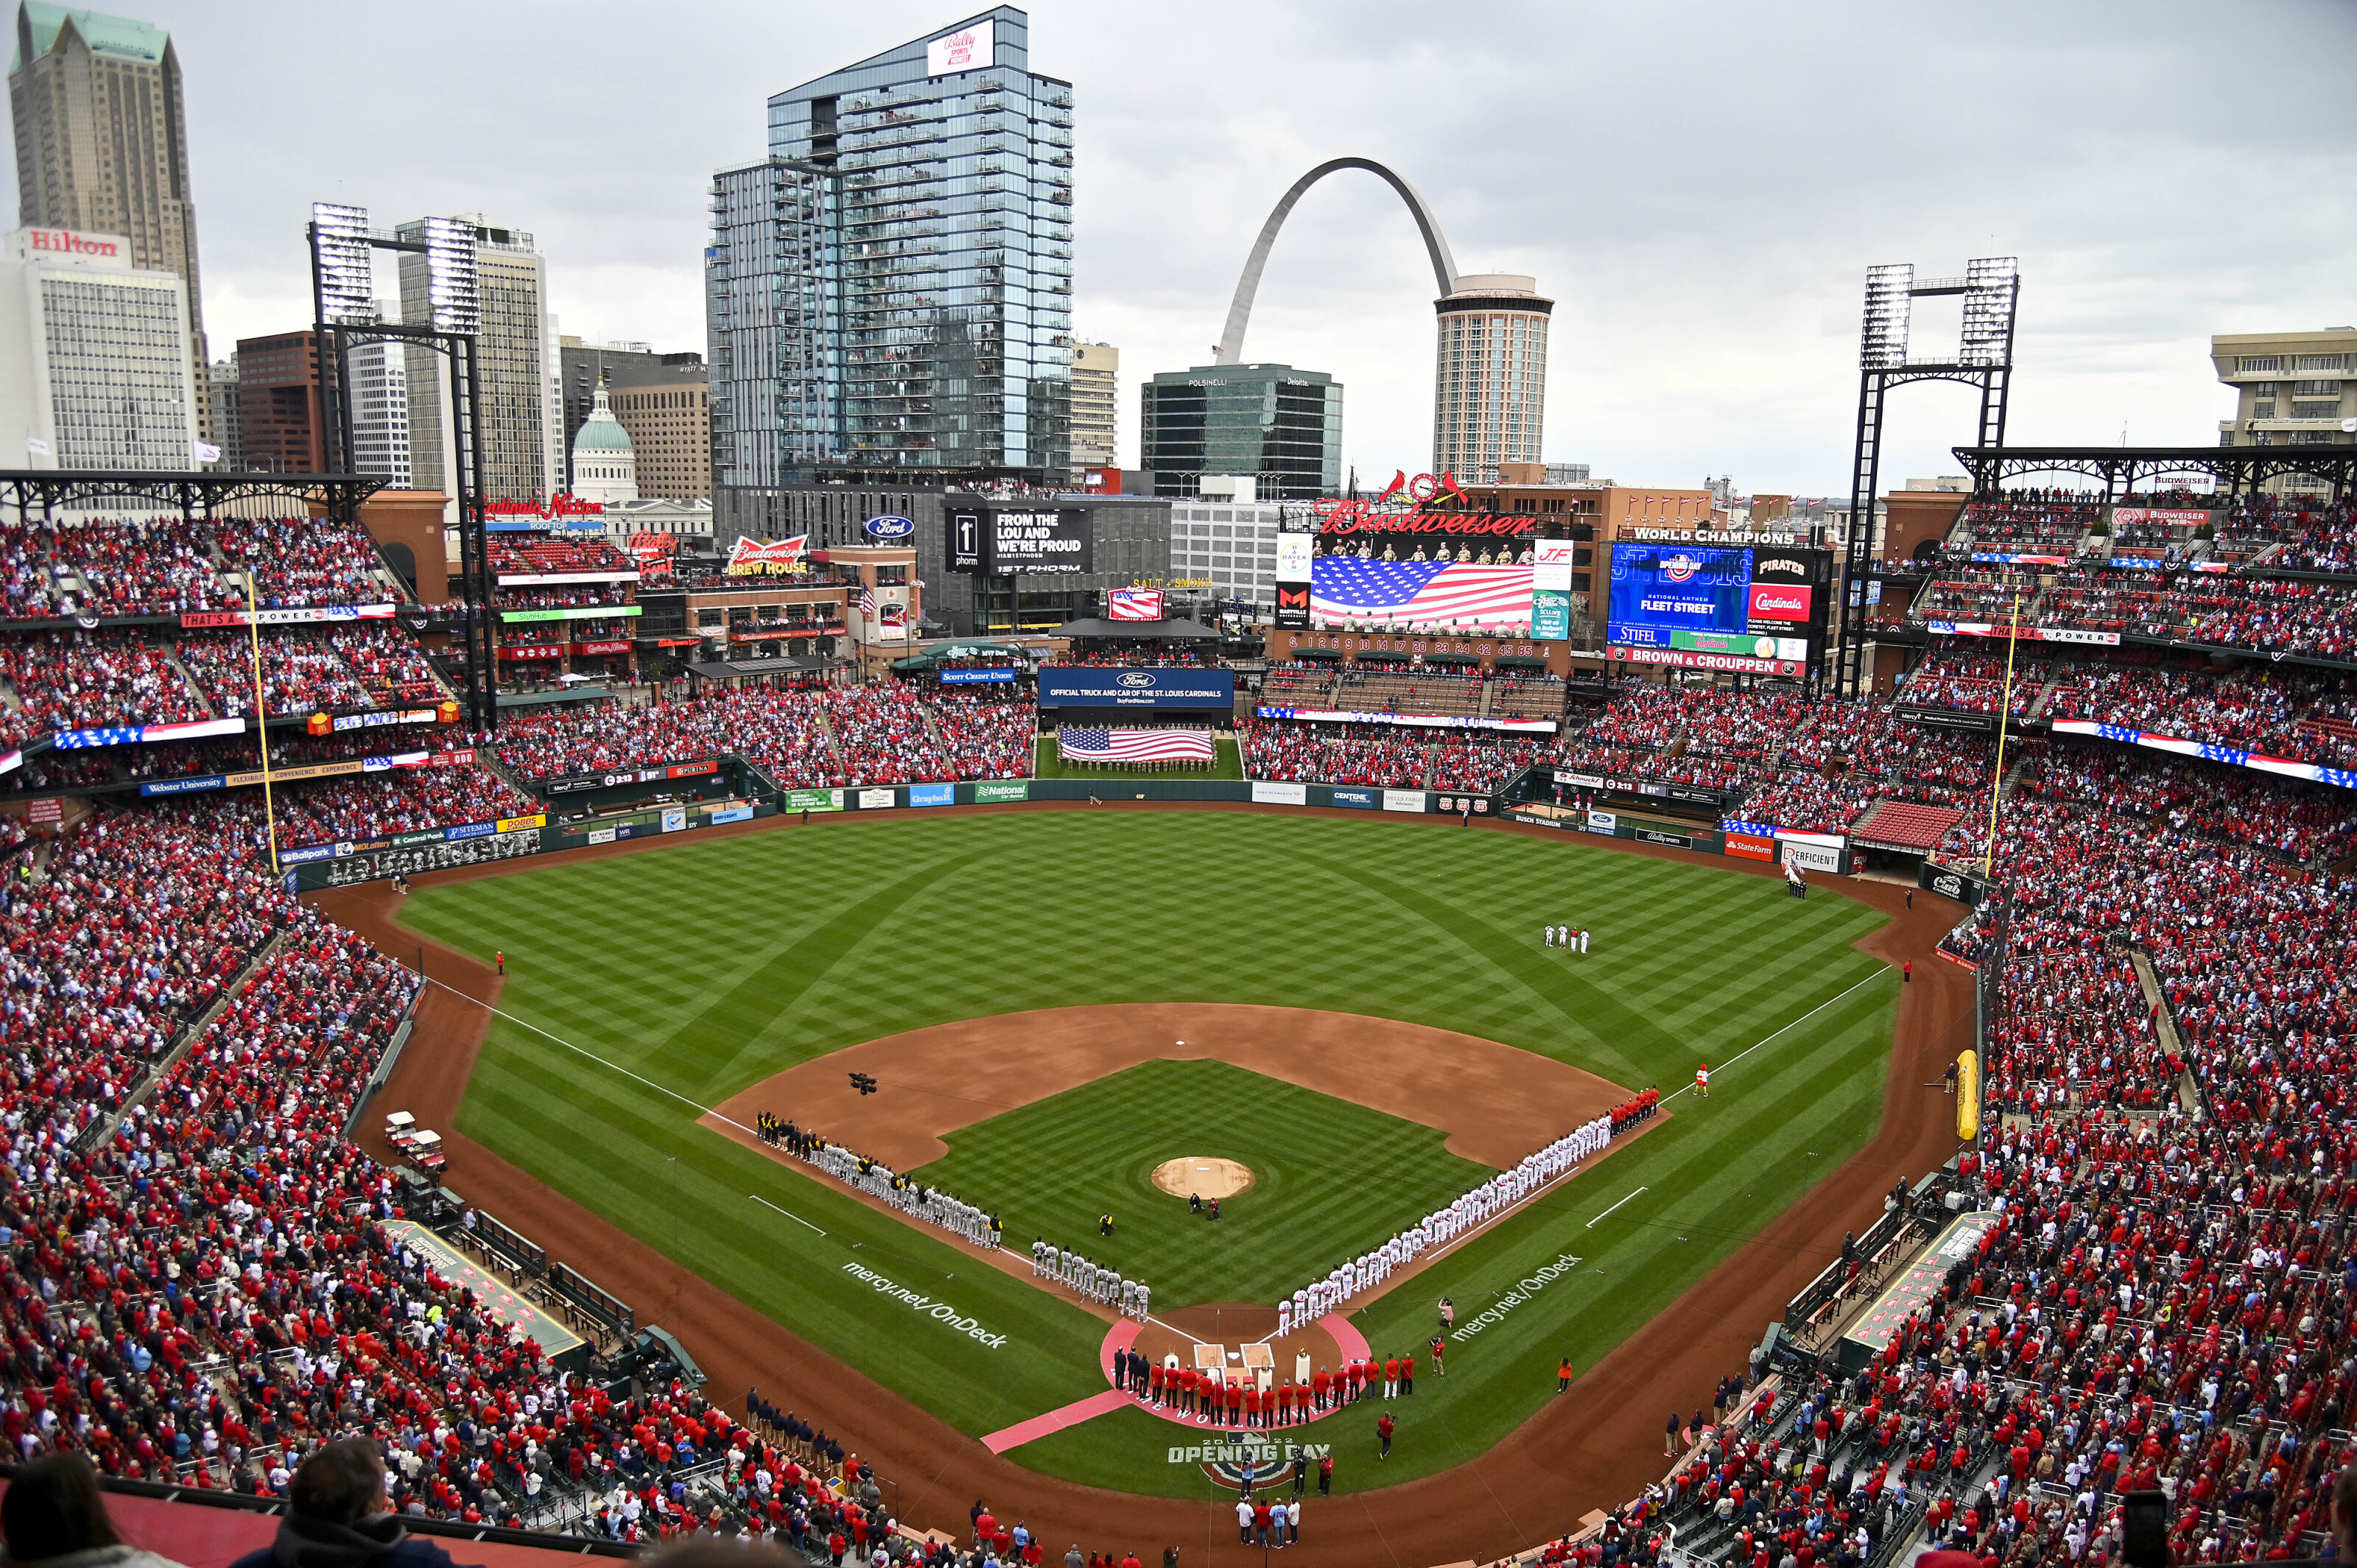 MLB Ballparks Without Naming Rights Deals  Ballpark Digest